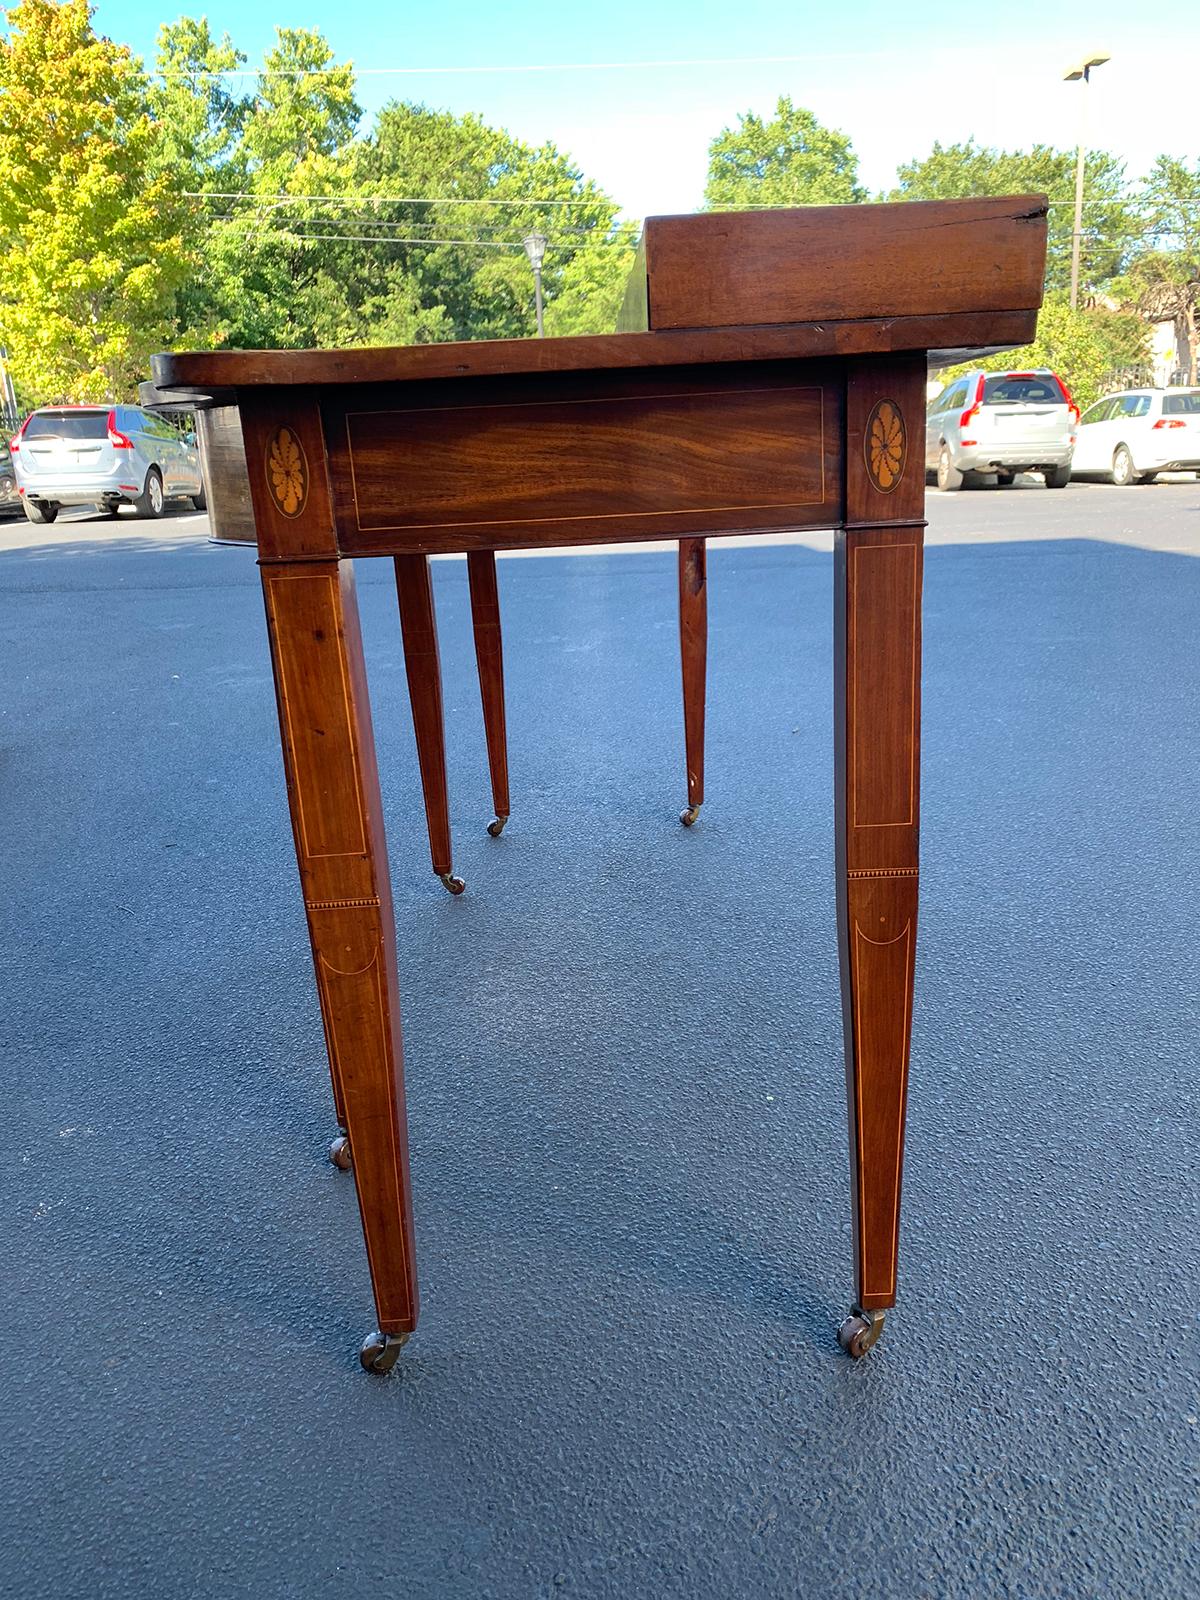 18th century George III shaped mahogany serving table, possibly Irish
string inlay and marquetry details
Measures: 74.5